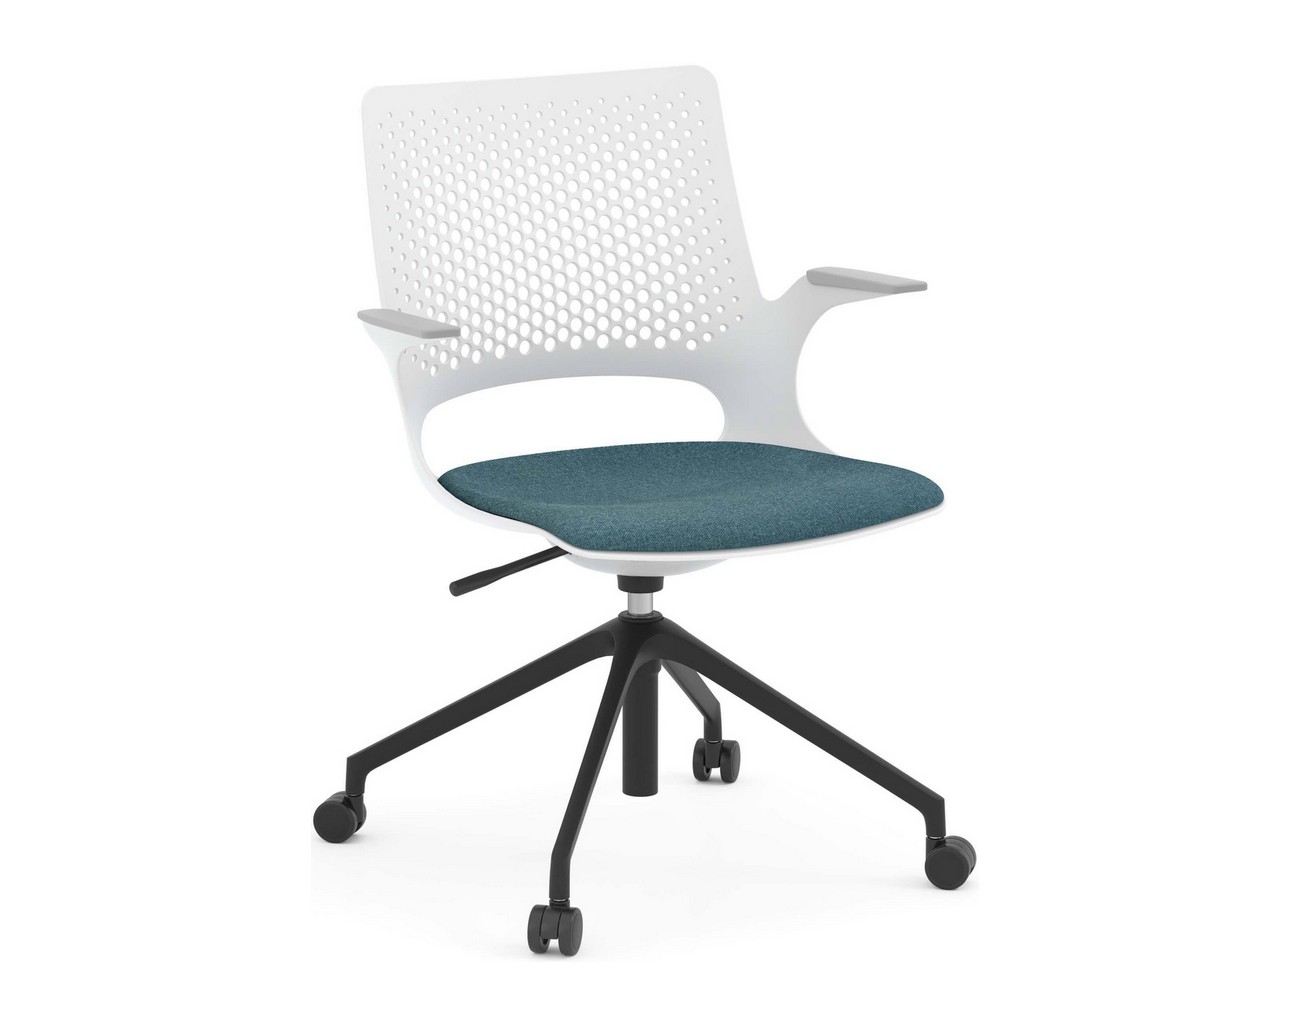 Harmony Multi-Purpose Chair – Black Base and Light Grey Frame with Teal Seat